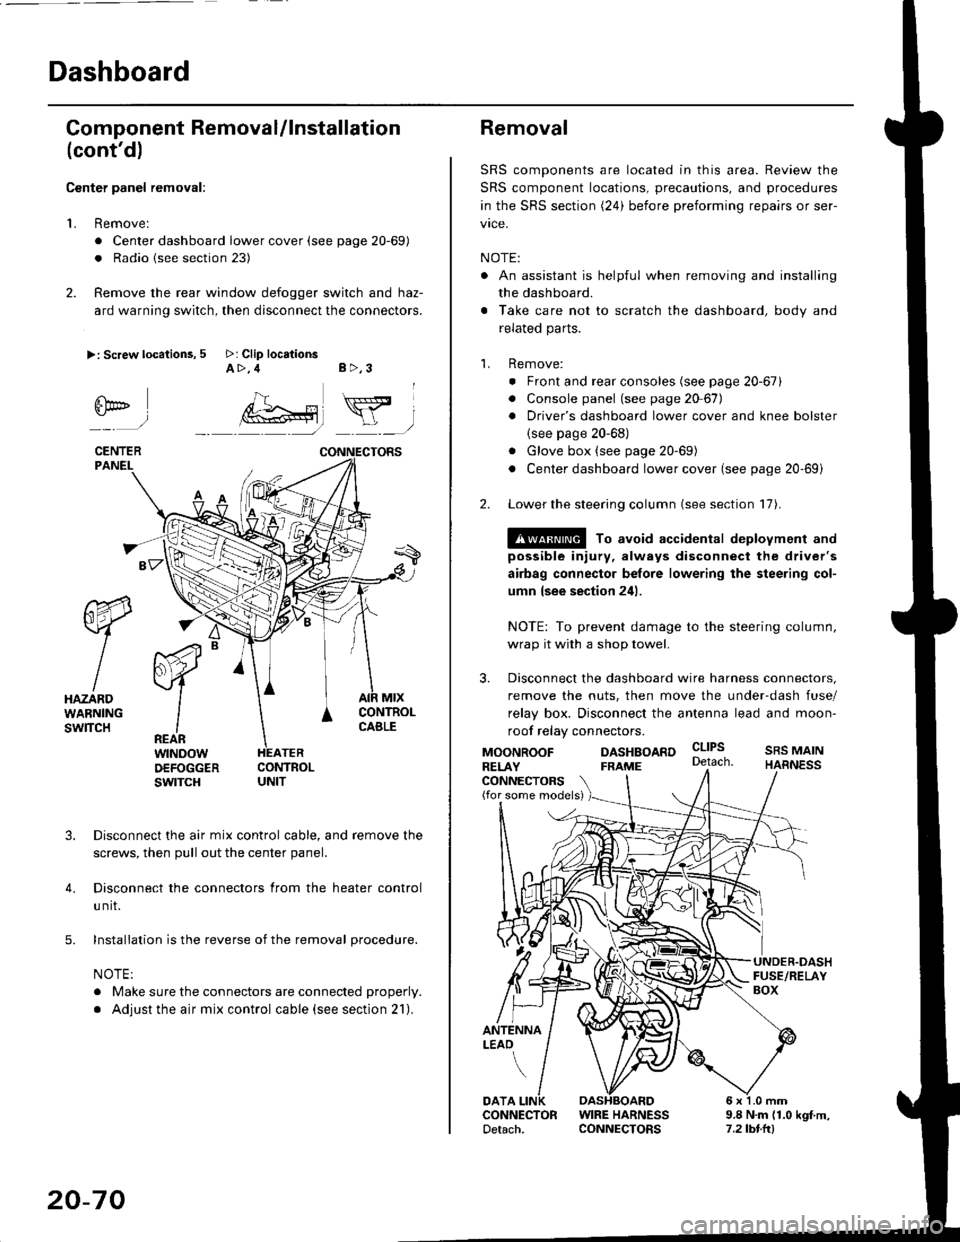 HONDA CIVIC 1996 6.G Service Manual Dashboard
Gomponent Removal/lnstallation
(contd)
Center panel removal:
1. Remove:
. Center dashboard lower cover (see page 20-69)
. Radio {see section 23)
2. Remove the rear window defogger switch an